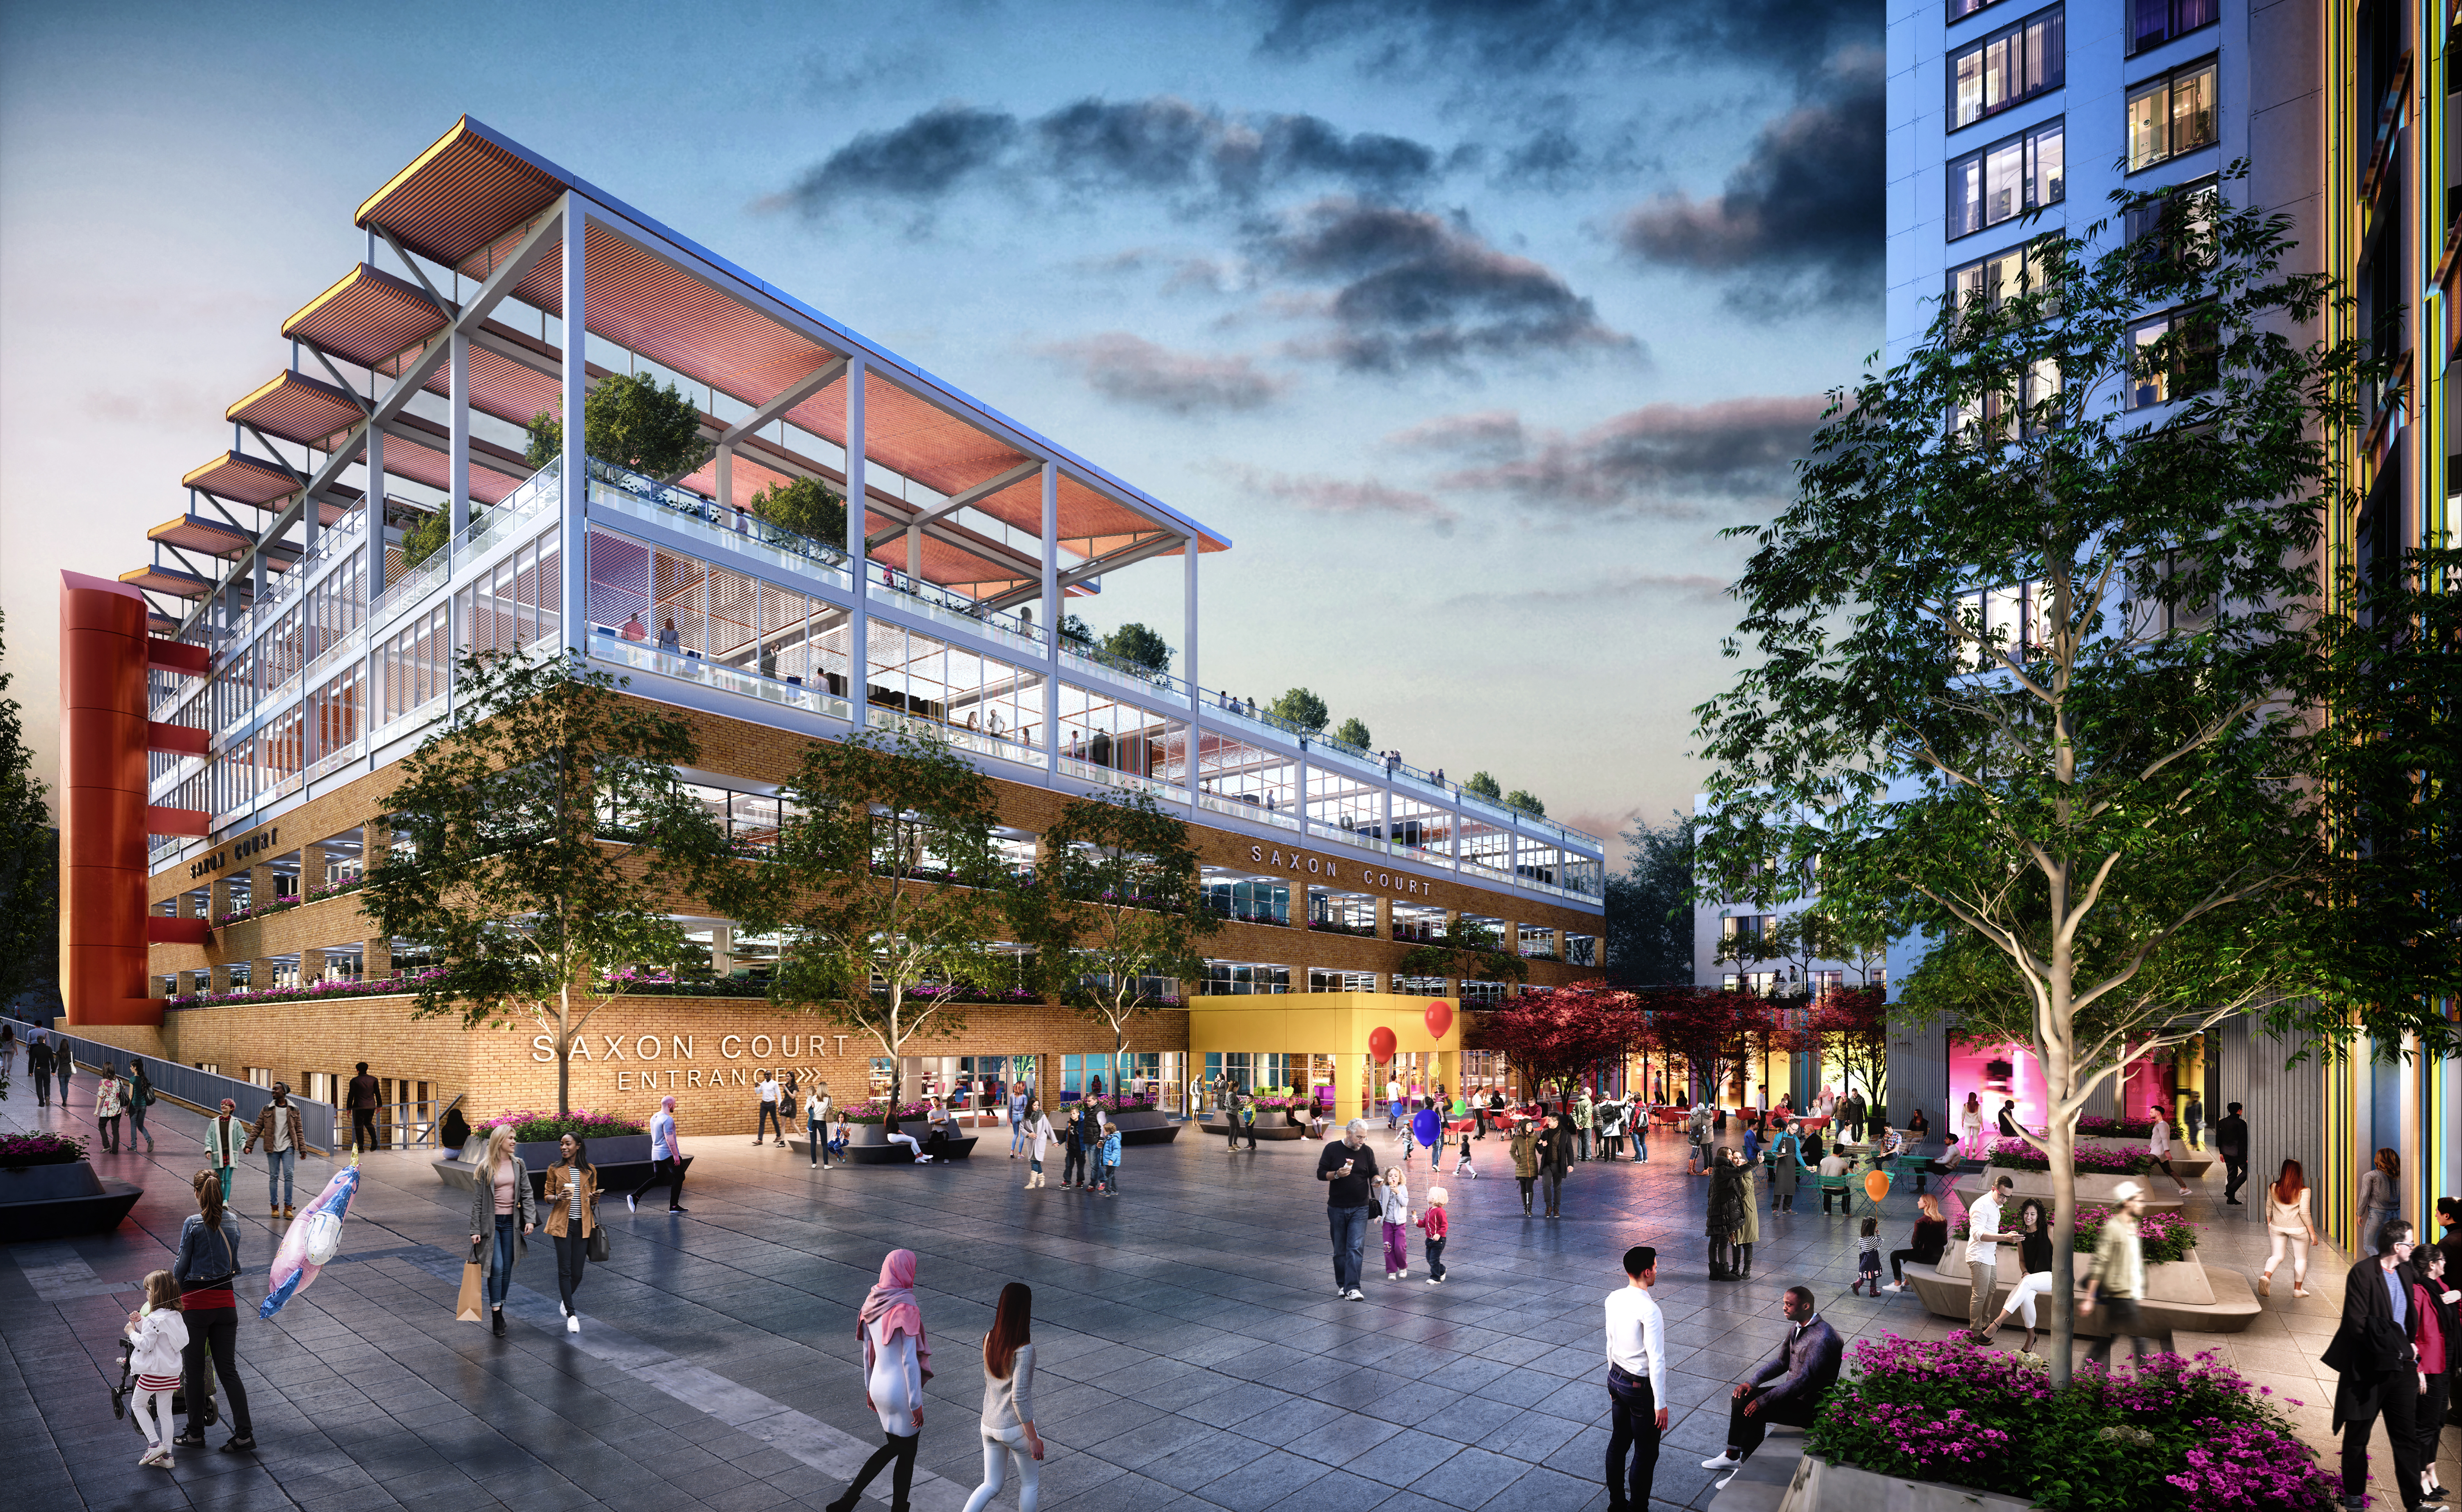 Creating a collaborative environment fit for Milton Keynes Innovation and tech community.